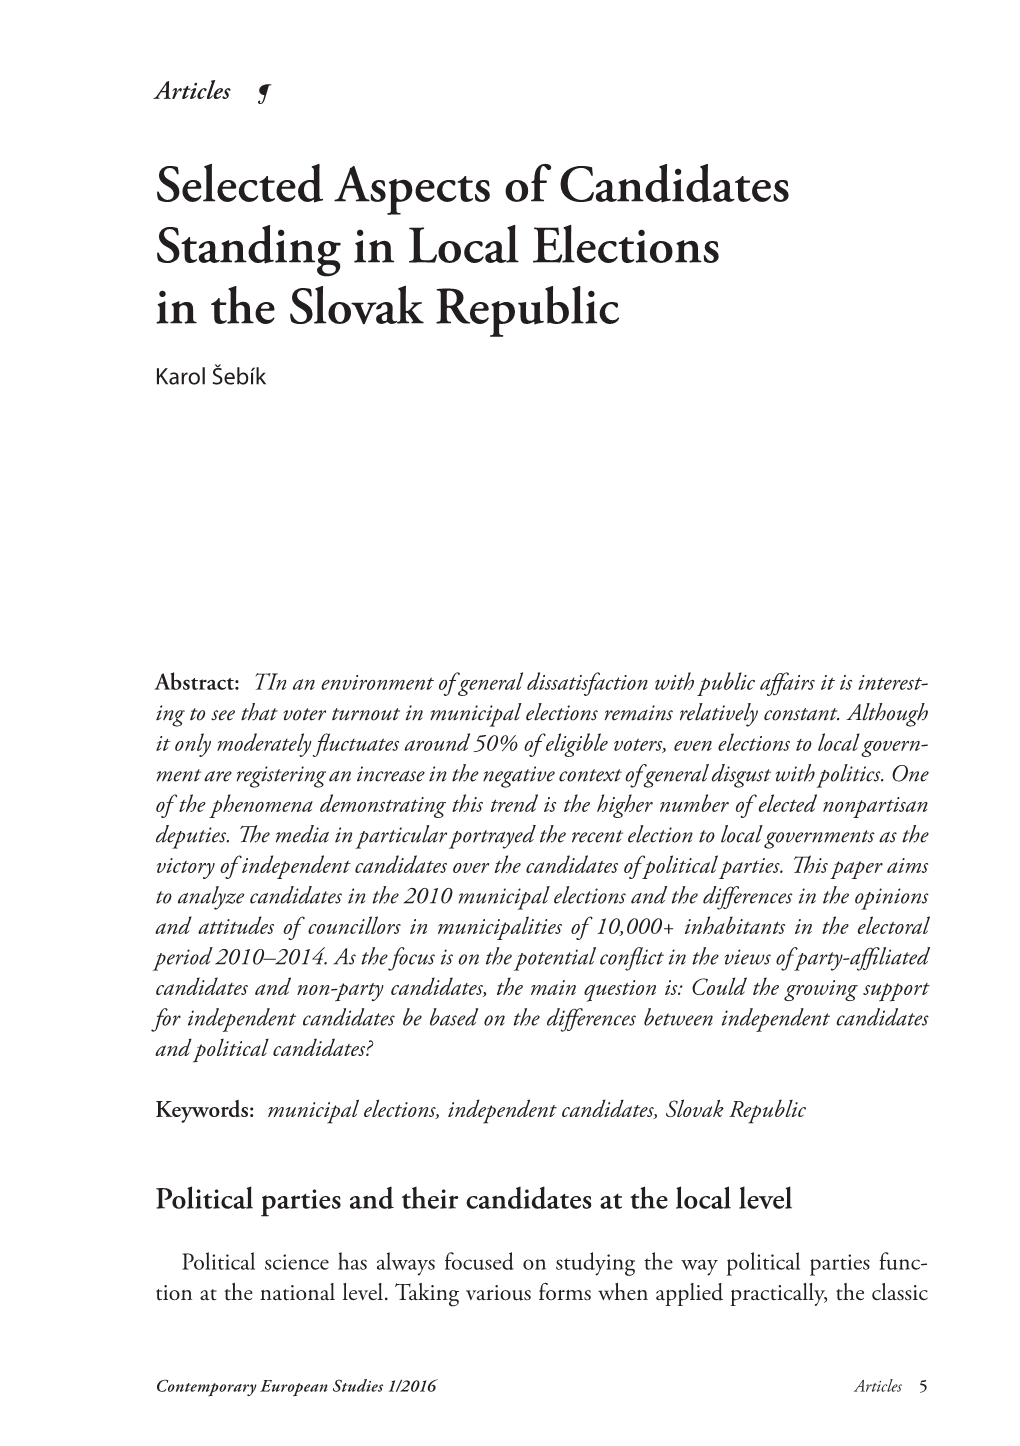 Selected Aspects of Candidates Standing in Local Elections in the Slovak Republic